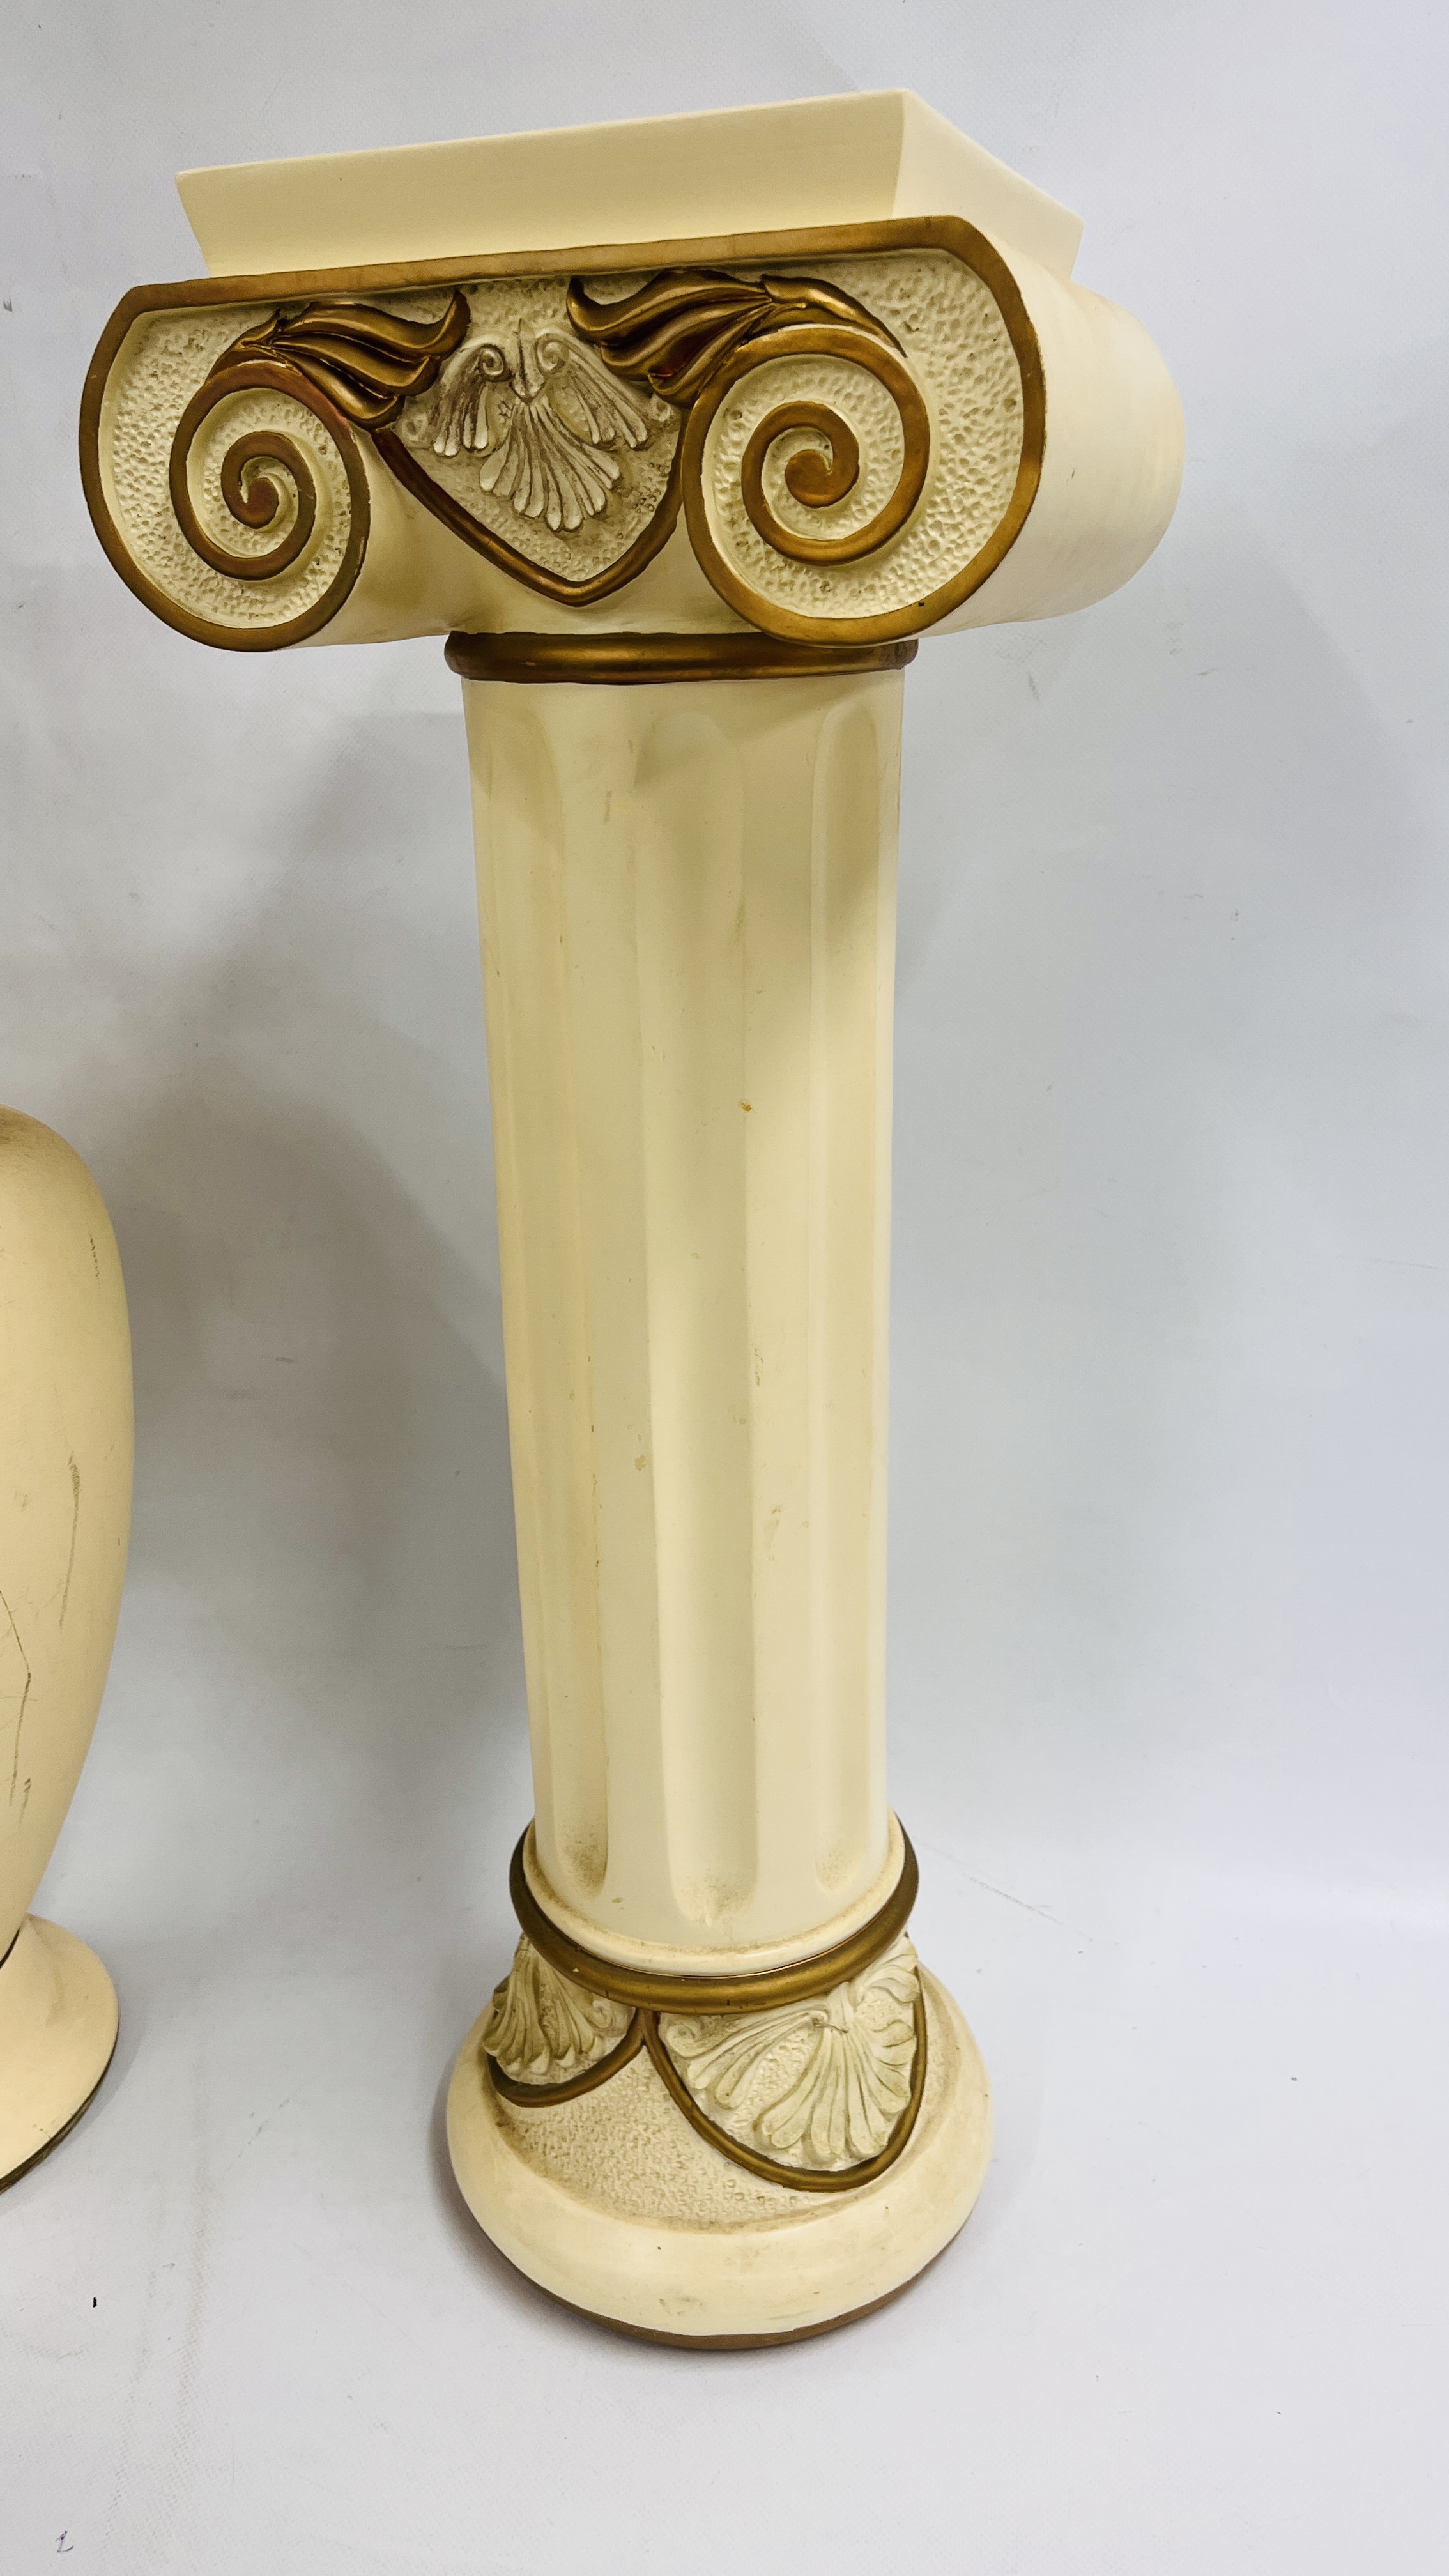 A MODERN CREAM FINISH VASE ON COLUMN BASE WITH GOLD DETAILING ALONG WITH A LARGE DECORATIVE FEMALE - Image 4 of 9